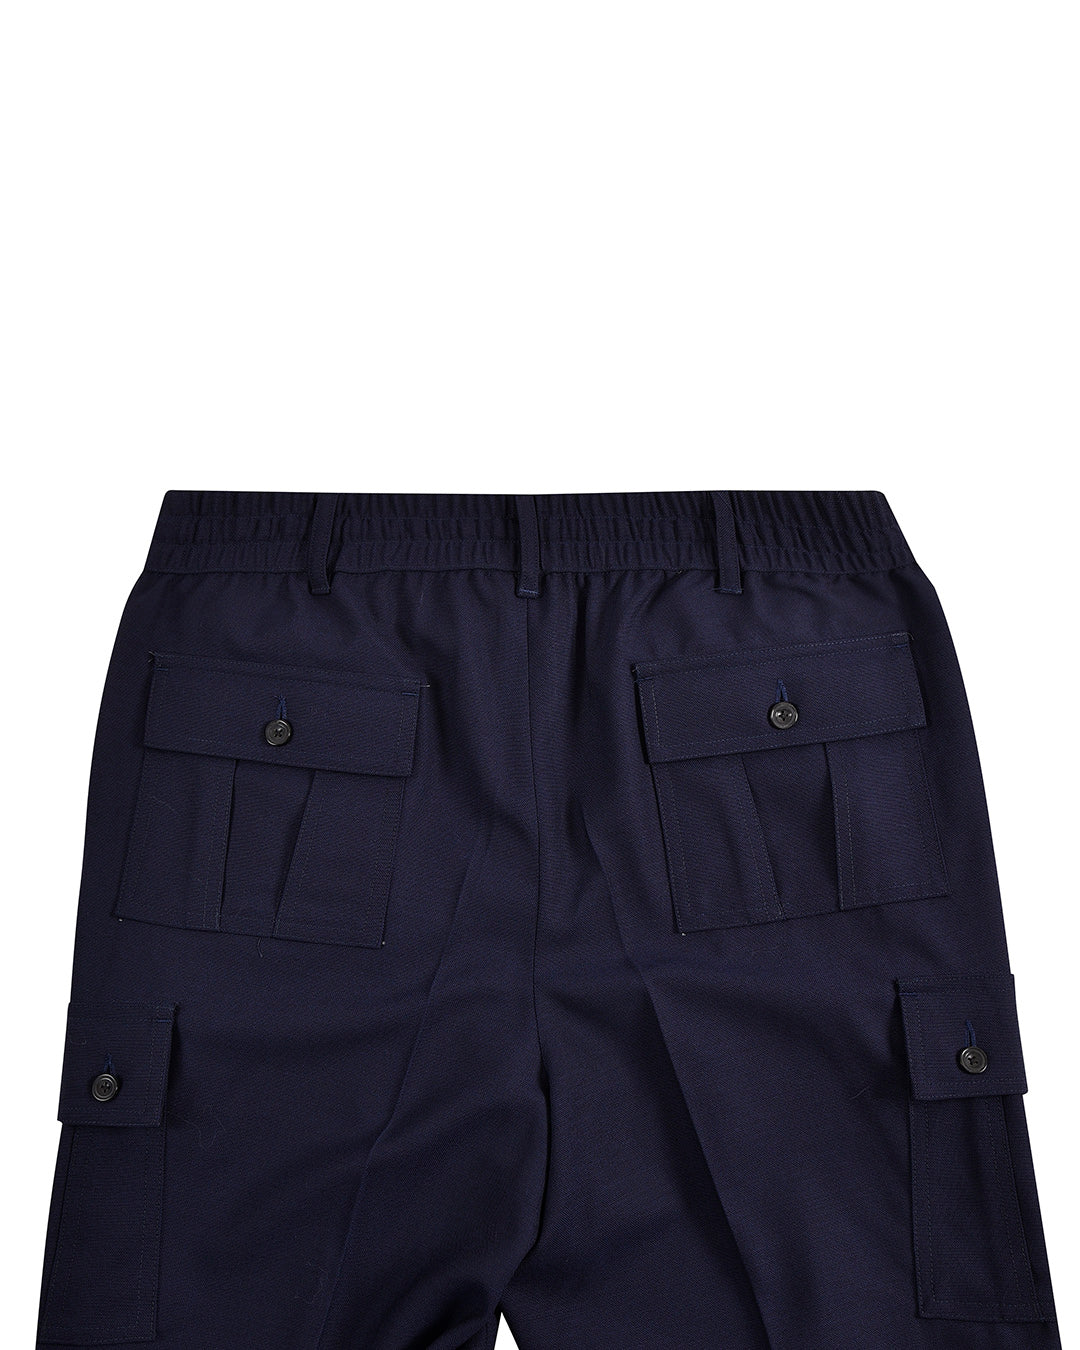 VBC - 4 Ply Tropical Wool: Navy Cargo Pant